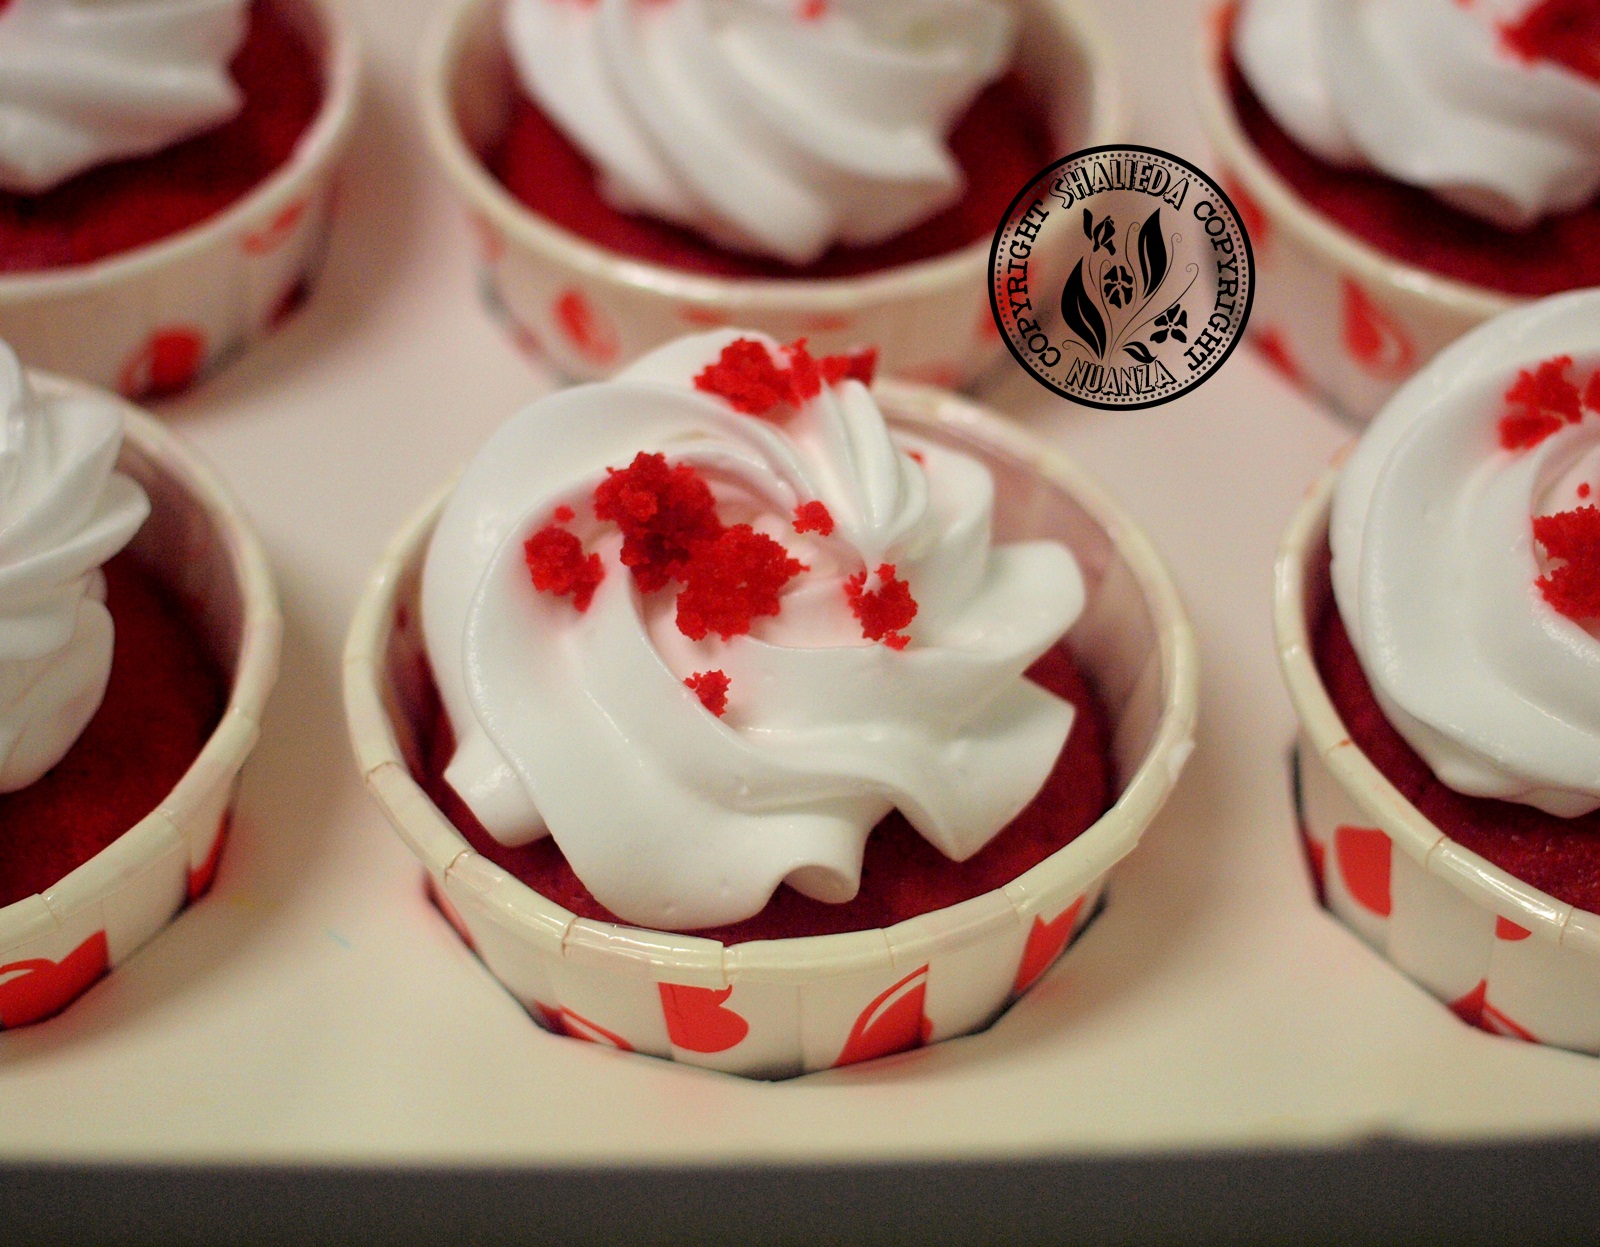 A Bite of Heaven: Feast on Muffin Red Velvet in All Its Seductive Glory!